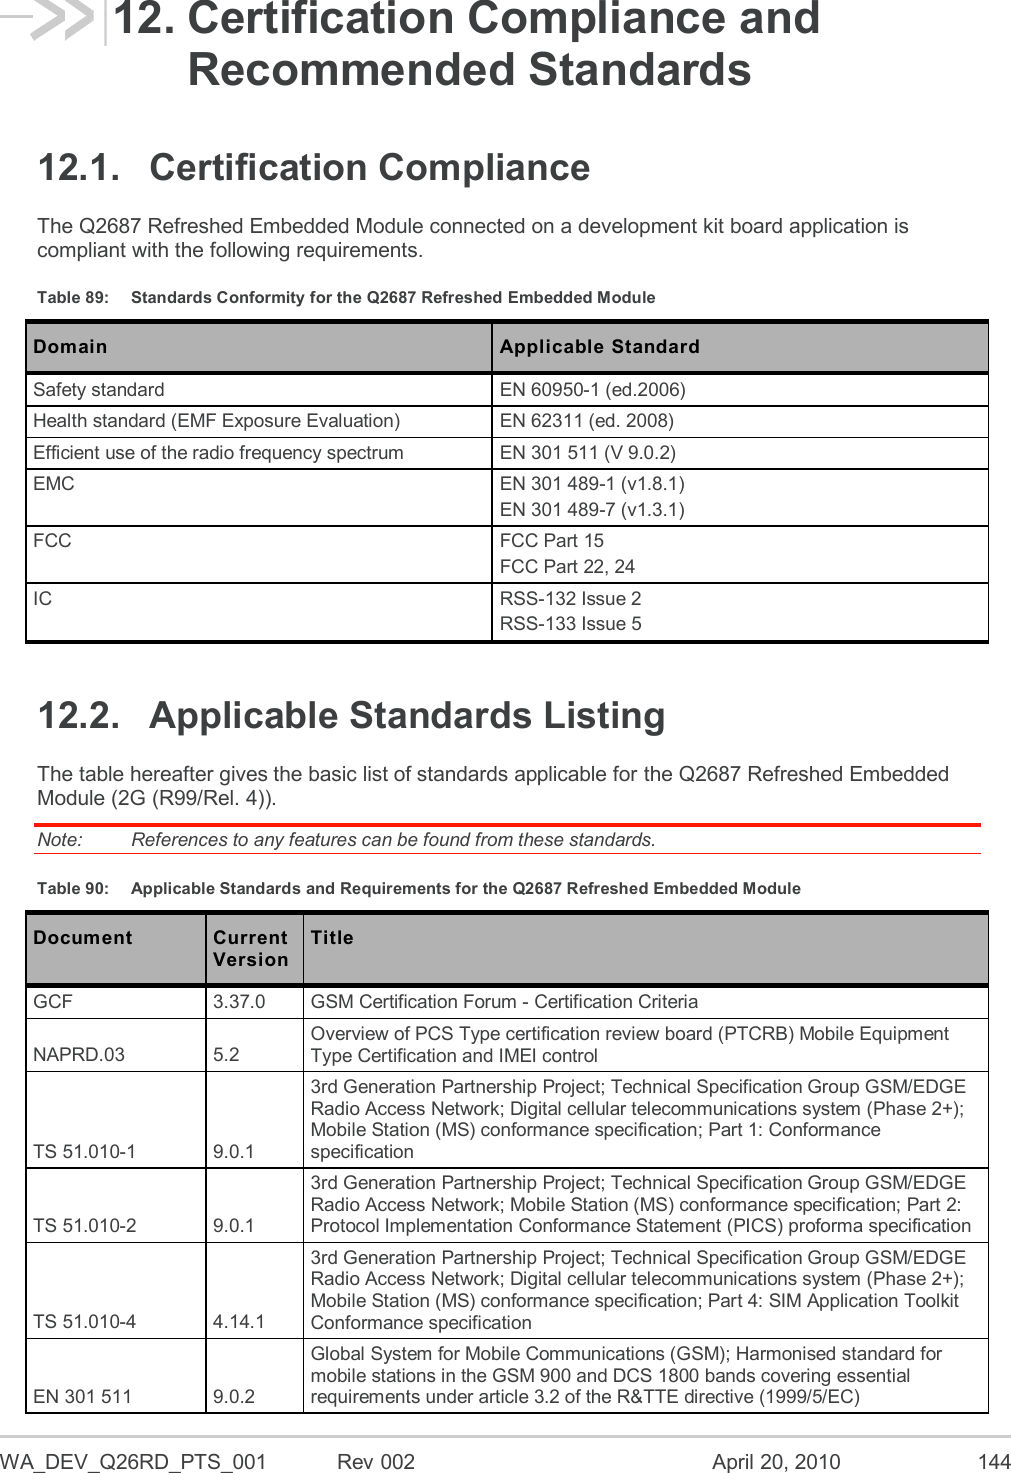  WA_DEV_Q26RD_PTS_001  Rev 002  April 20, 2010 144 12. Certification Compliance and Recommended Standards 12.1.  Certification Compliance The Q2687 Refreshed Embedded Module connected on a development kit board application is compliant with the following requirements. Table 89:  Standards Conformity for the Q2687 Refreshed Embedded Module Domain Applicable Standard Safety standard EN 60950-1 (ed.2006) Health standard (EMF Exposure Evaluation) EN 62311 (ed. 2008) Efficient use of the radio frequency spectrum EN 301 511 (V 9.0.2) EMC EN 301 489-1 (v1.8.1) EN 301 489-7 (v1.3.1) FCC FCC Part 15  FCC Part 22, 24  IC RSS-132 Issue 2 RSS-133 Issue 5 12.2.  Applicable Standards Listing The table hereafter gives the basic list of standards applicable for the Q2687 Refreshed Embedded Module (2G (R99/Rel. 4)).  Note:   References to any features can be found from these standards. Table 90:  Applicable Standards and Requirements for the Q2687 Refreshed Embedded Module Document Current Version Title GCF  3.37.0  GSM Certification Forum - Certification Criteria  NAPRD.03 5.2 Overview of PCS Type certification review board (PTCRB) Mobile Equipment Type Certification and IMEI control  TS 51.010-1  9.0.1 3rd Generation Partnership Project; Technical Specification Group GSM/EDGE Radio Access Network; Digital cellular telecommunications system (Phase 2+); Mobile Station (MS) conformance specification; Part 1: Conformance specification  TS 51.010-2  9.0.1  3rd Generation Partnership Project; Technical Specification Group GSM/EDGE Radio Access Network; Mobile Station (MS) conformance specification; Part 2: Protocol Implementation Conformance Statement (PICS) proforma specification  TS 51.010-4  4.14.1  3rd Generation Partnership Project; Technical Specification Group GSM/EDGE Radio Access Network; Digital cellular telecommunications system (Phase 2+); Mobile Station (MS) conformance specification; Part 4: SIM Application Toolkit Conformance specification  EN 301 511  9.0.2  Global System for Mobile Communications (GSM); Harmonised standard for mobile stations in the GSM 900 and DCS 1800 bands covering essential requirements under article 3.2 of the R&amp;TTE directive (1999/5/EC)  